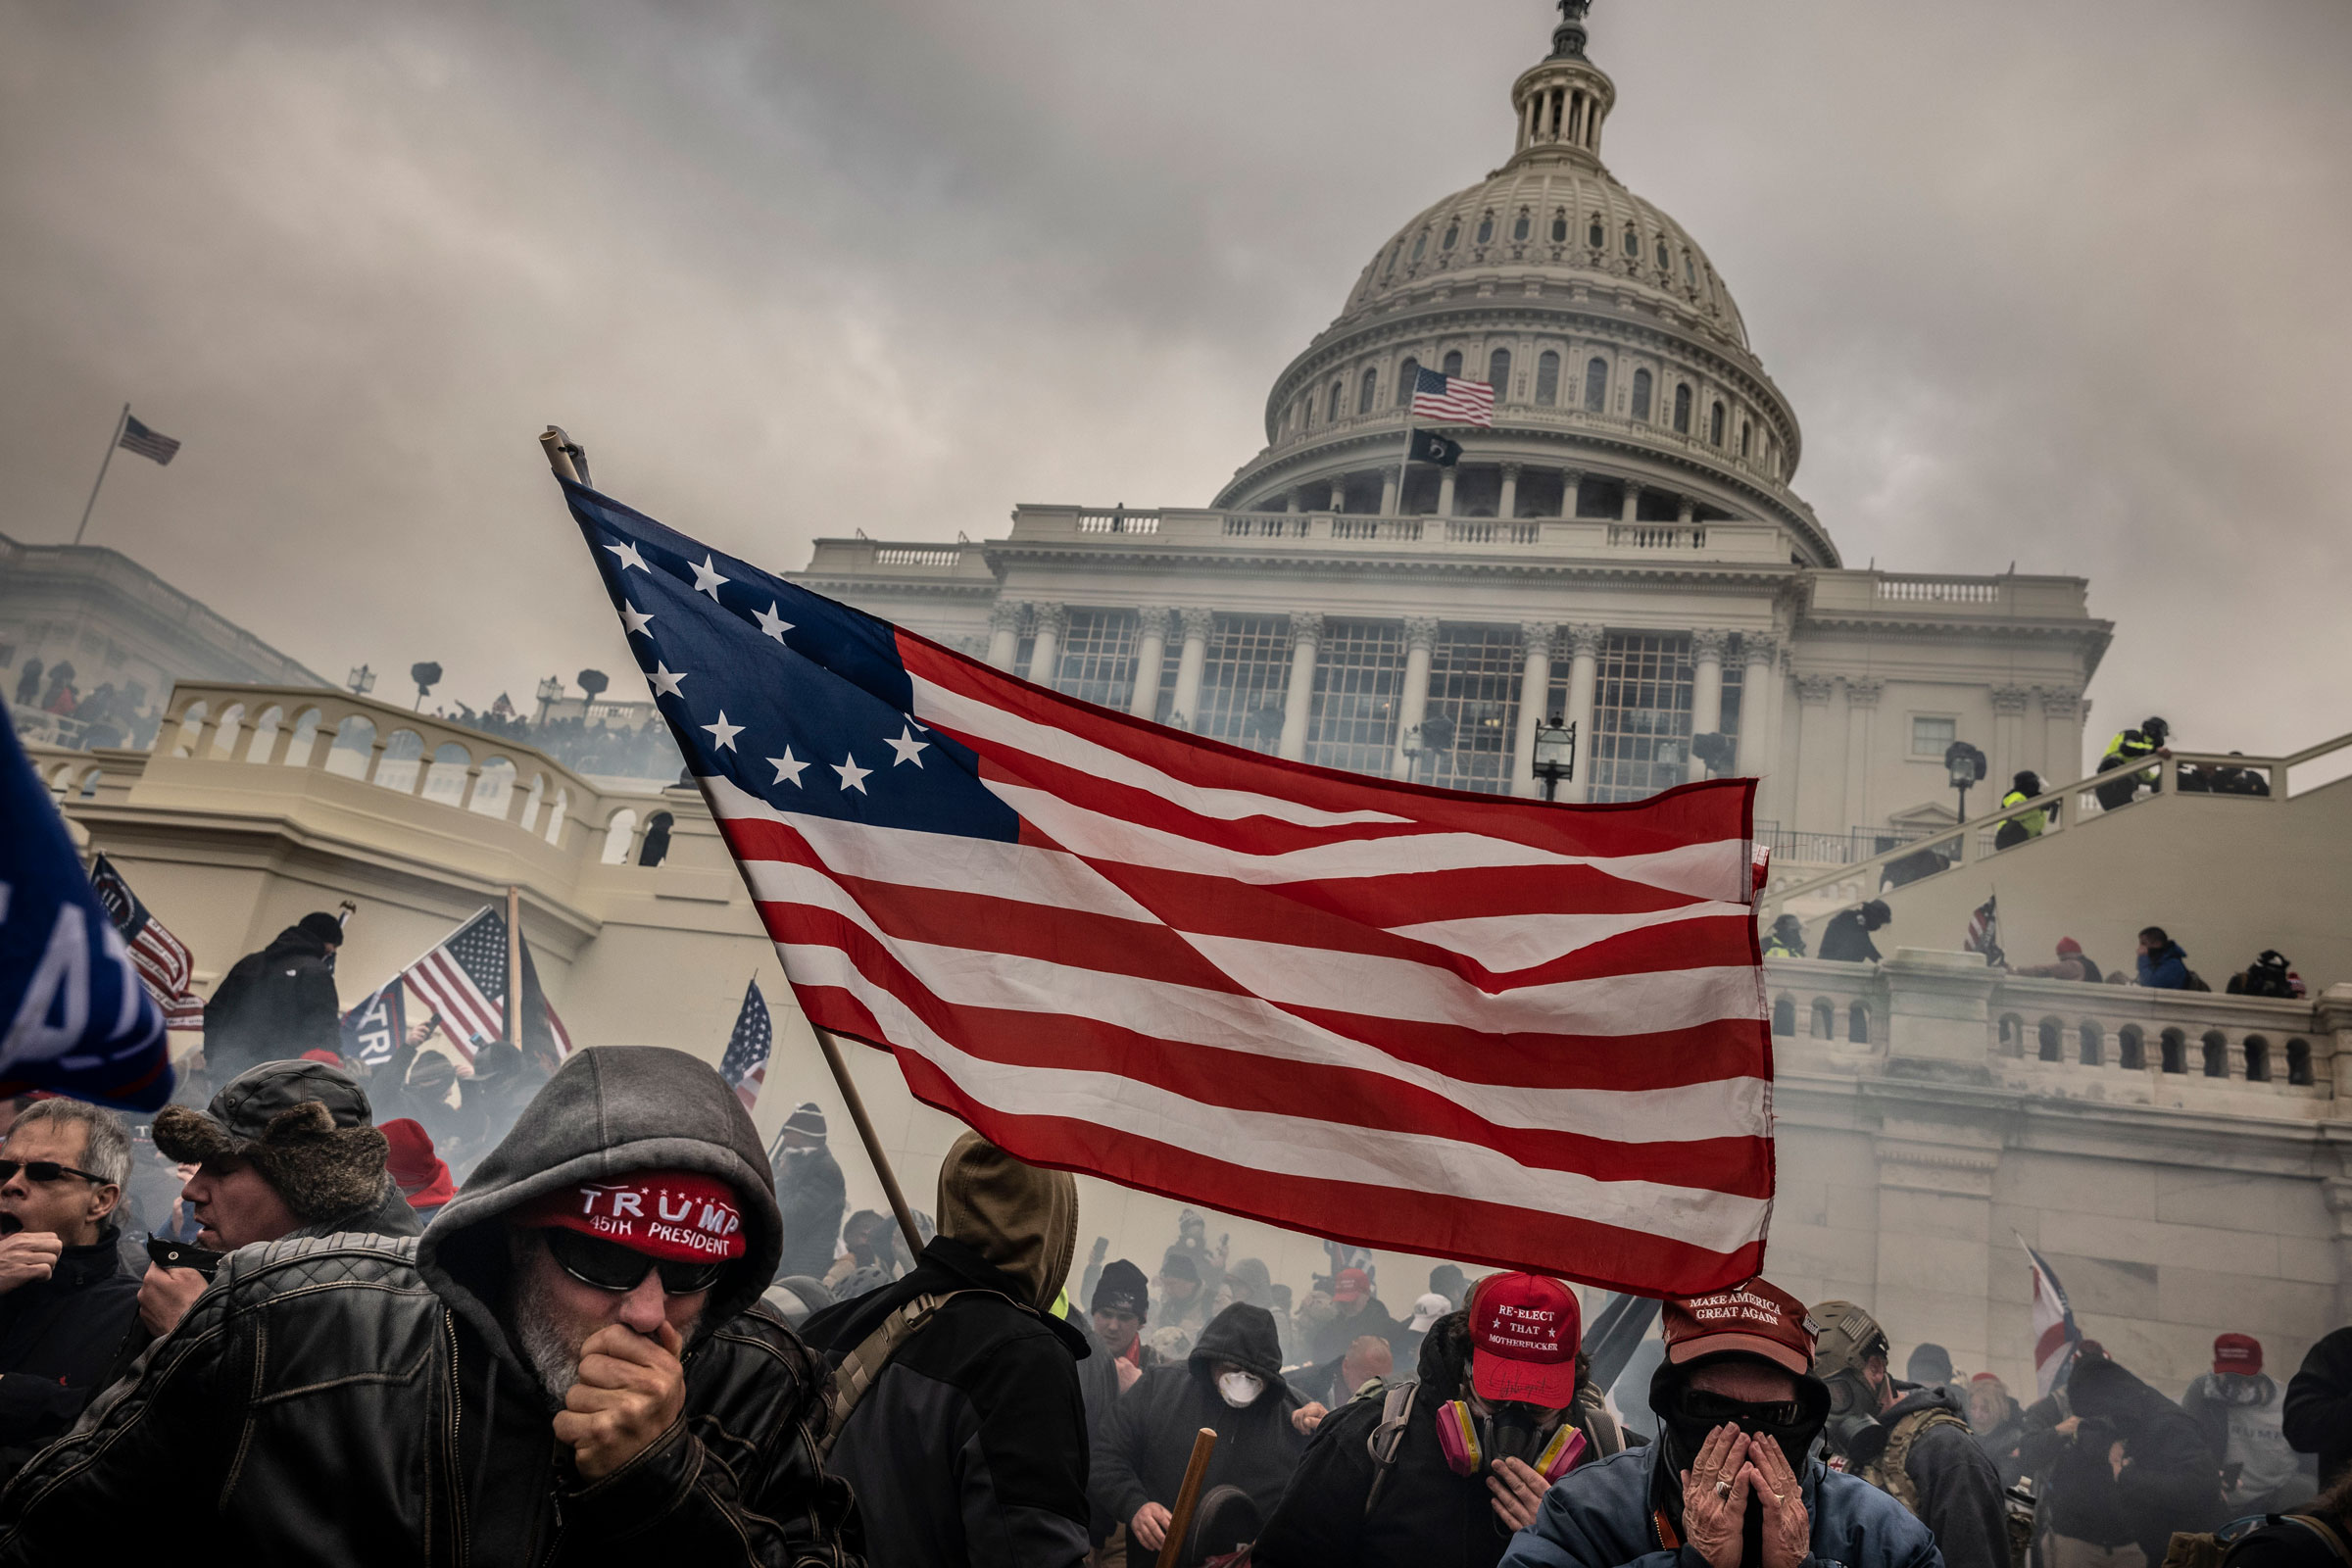 Supporters of President Trump who are trying to overturn the results of the 2020 presidential election clash with police, as the crowd storms up the west side steps of the U.S. Capitol, on Jan. 6, 2021. (David Butow—Redux)